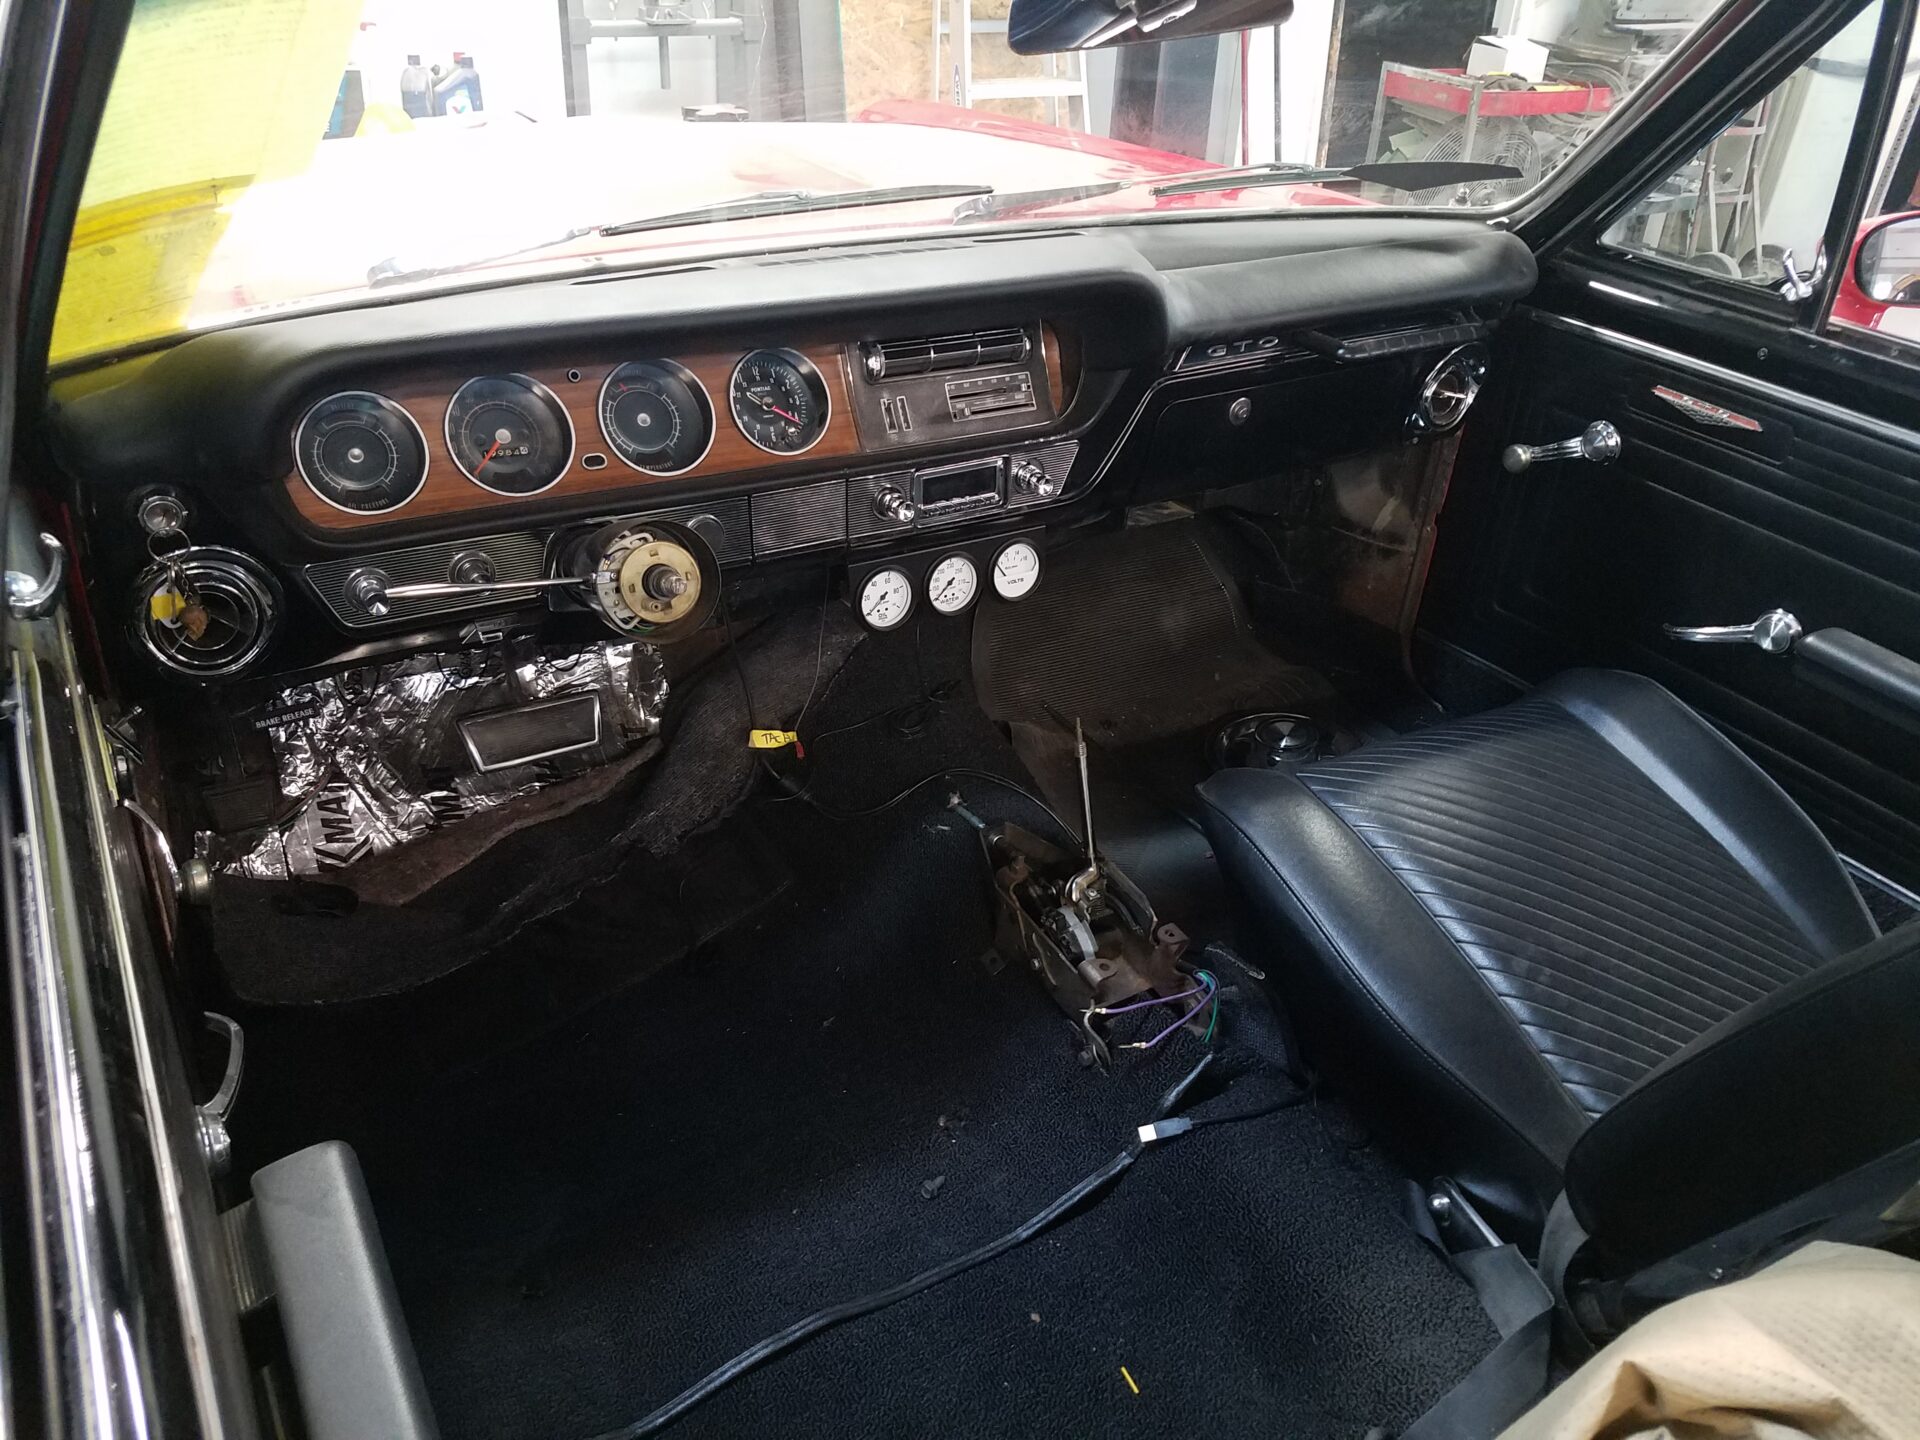 Damges removed from the 1965 Pontiac GTO interior